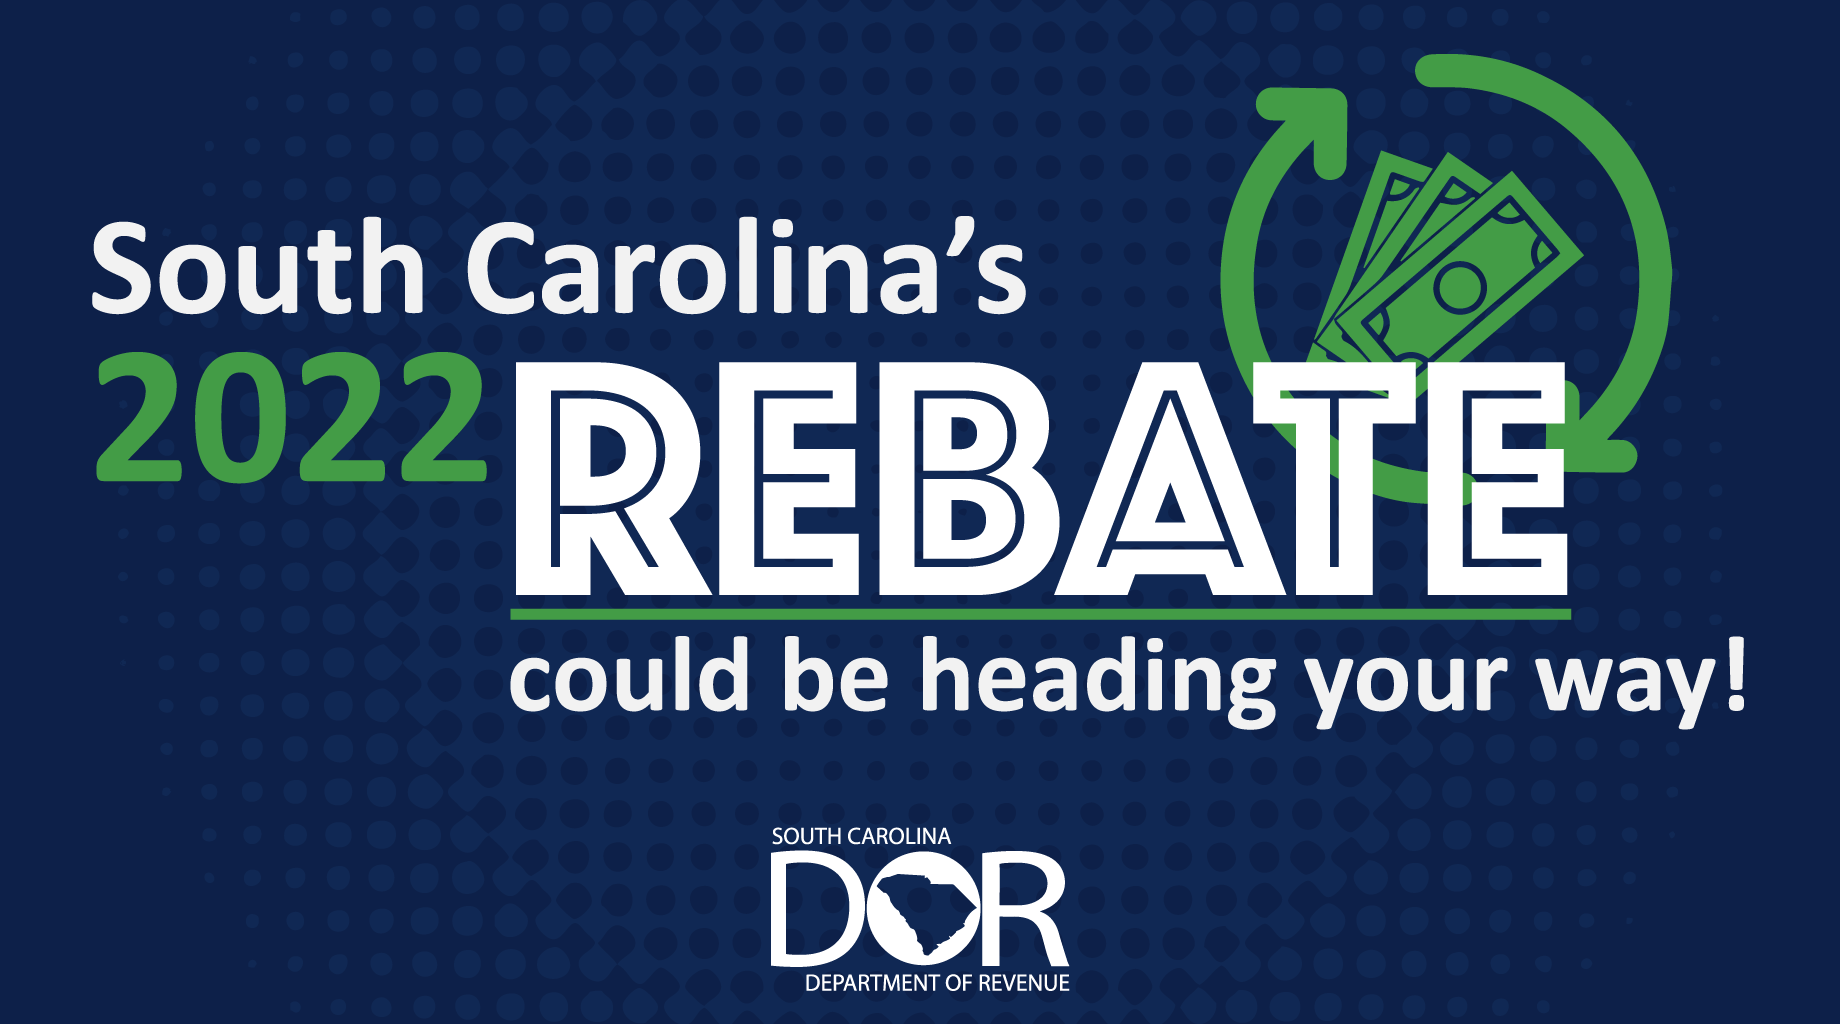 BCBS is sending out rebate checks. Find out why.